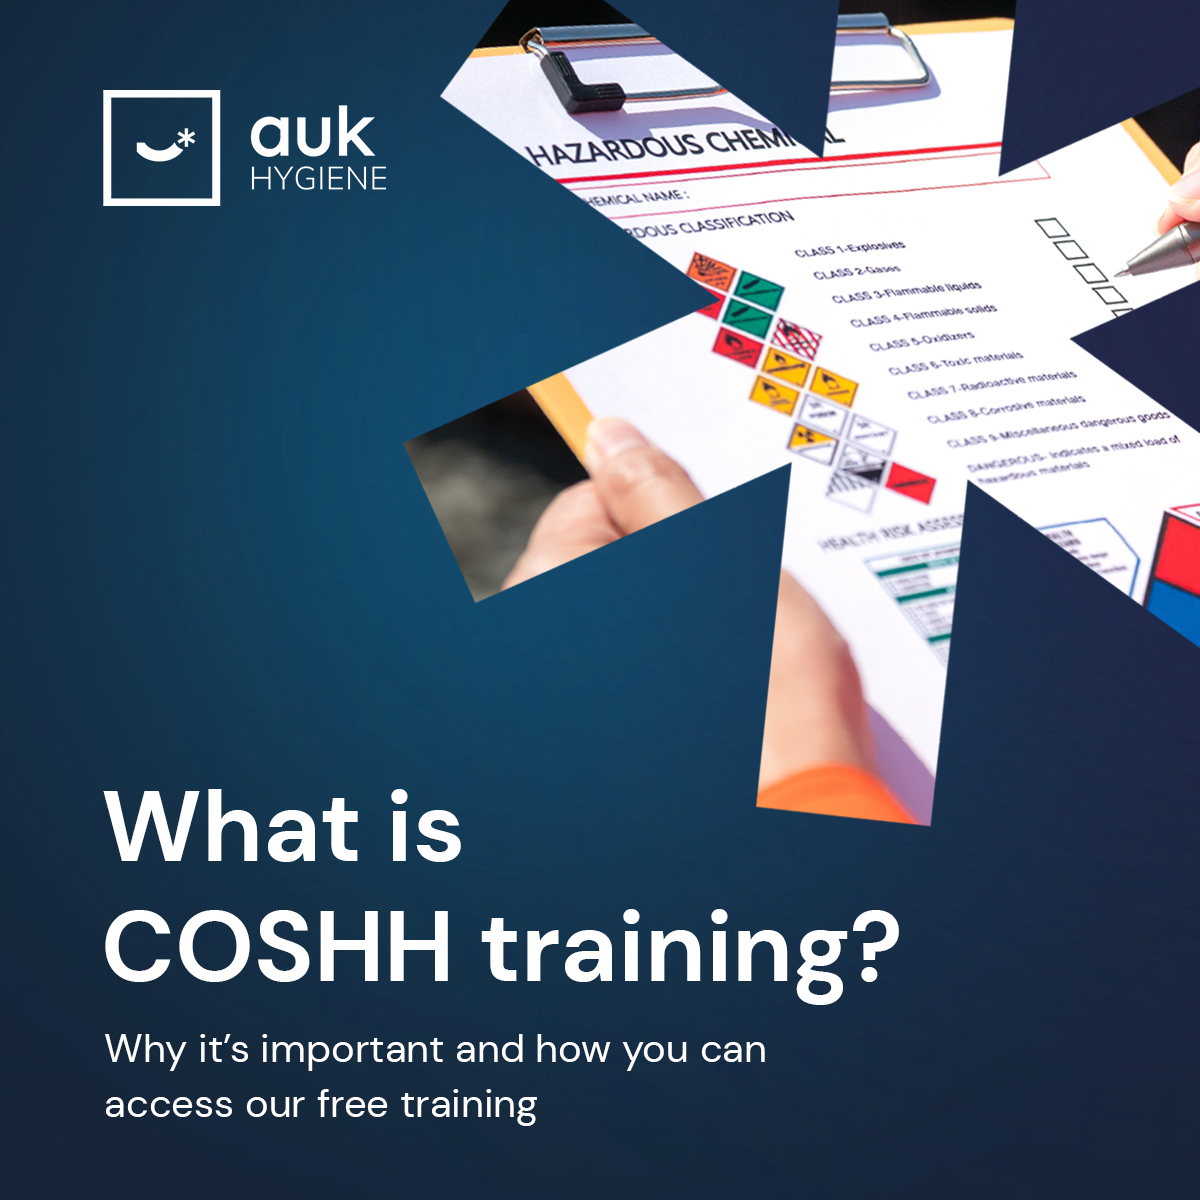 What is COSHH training